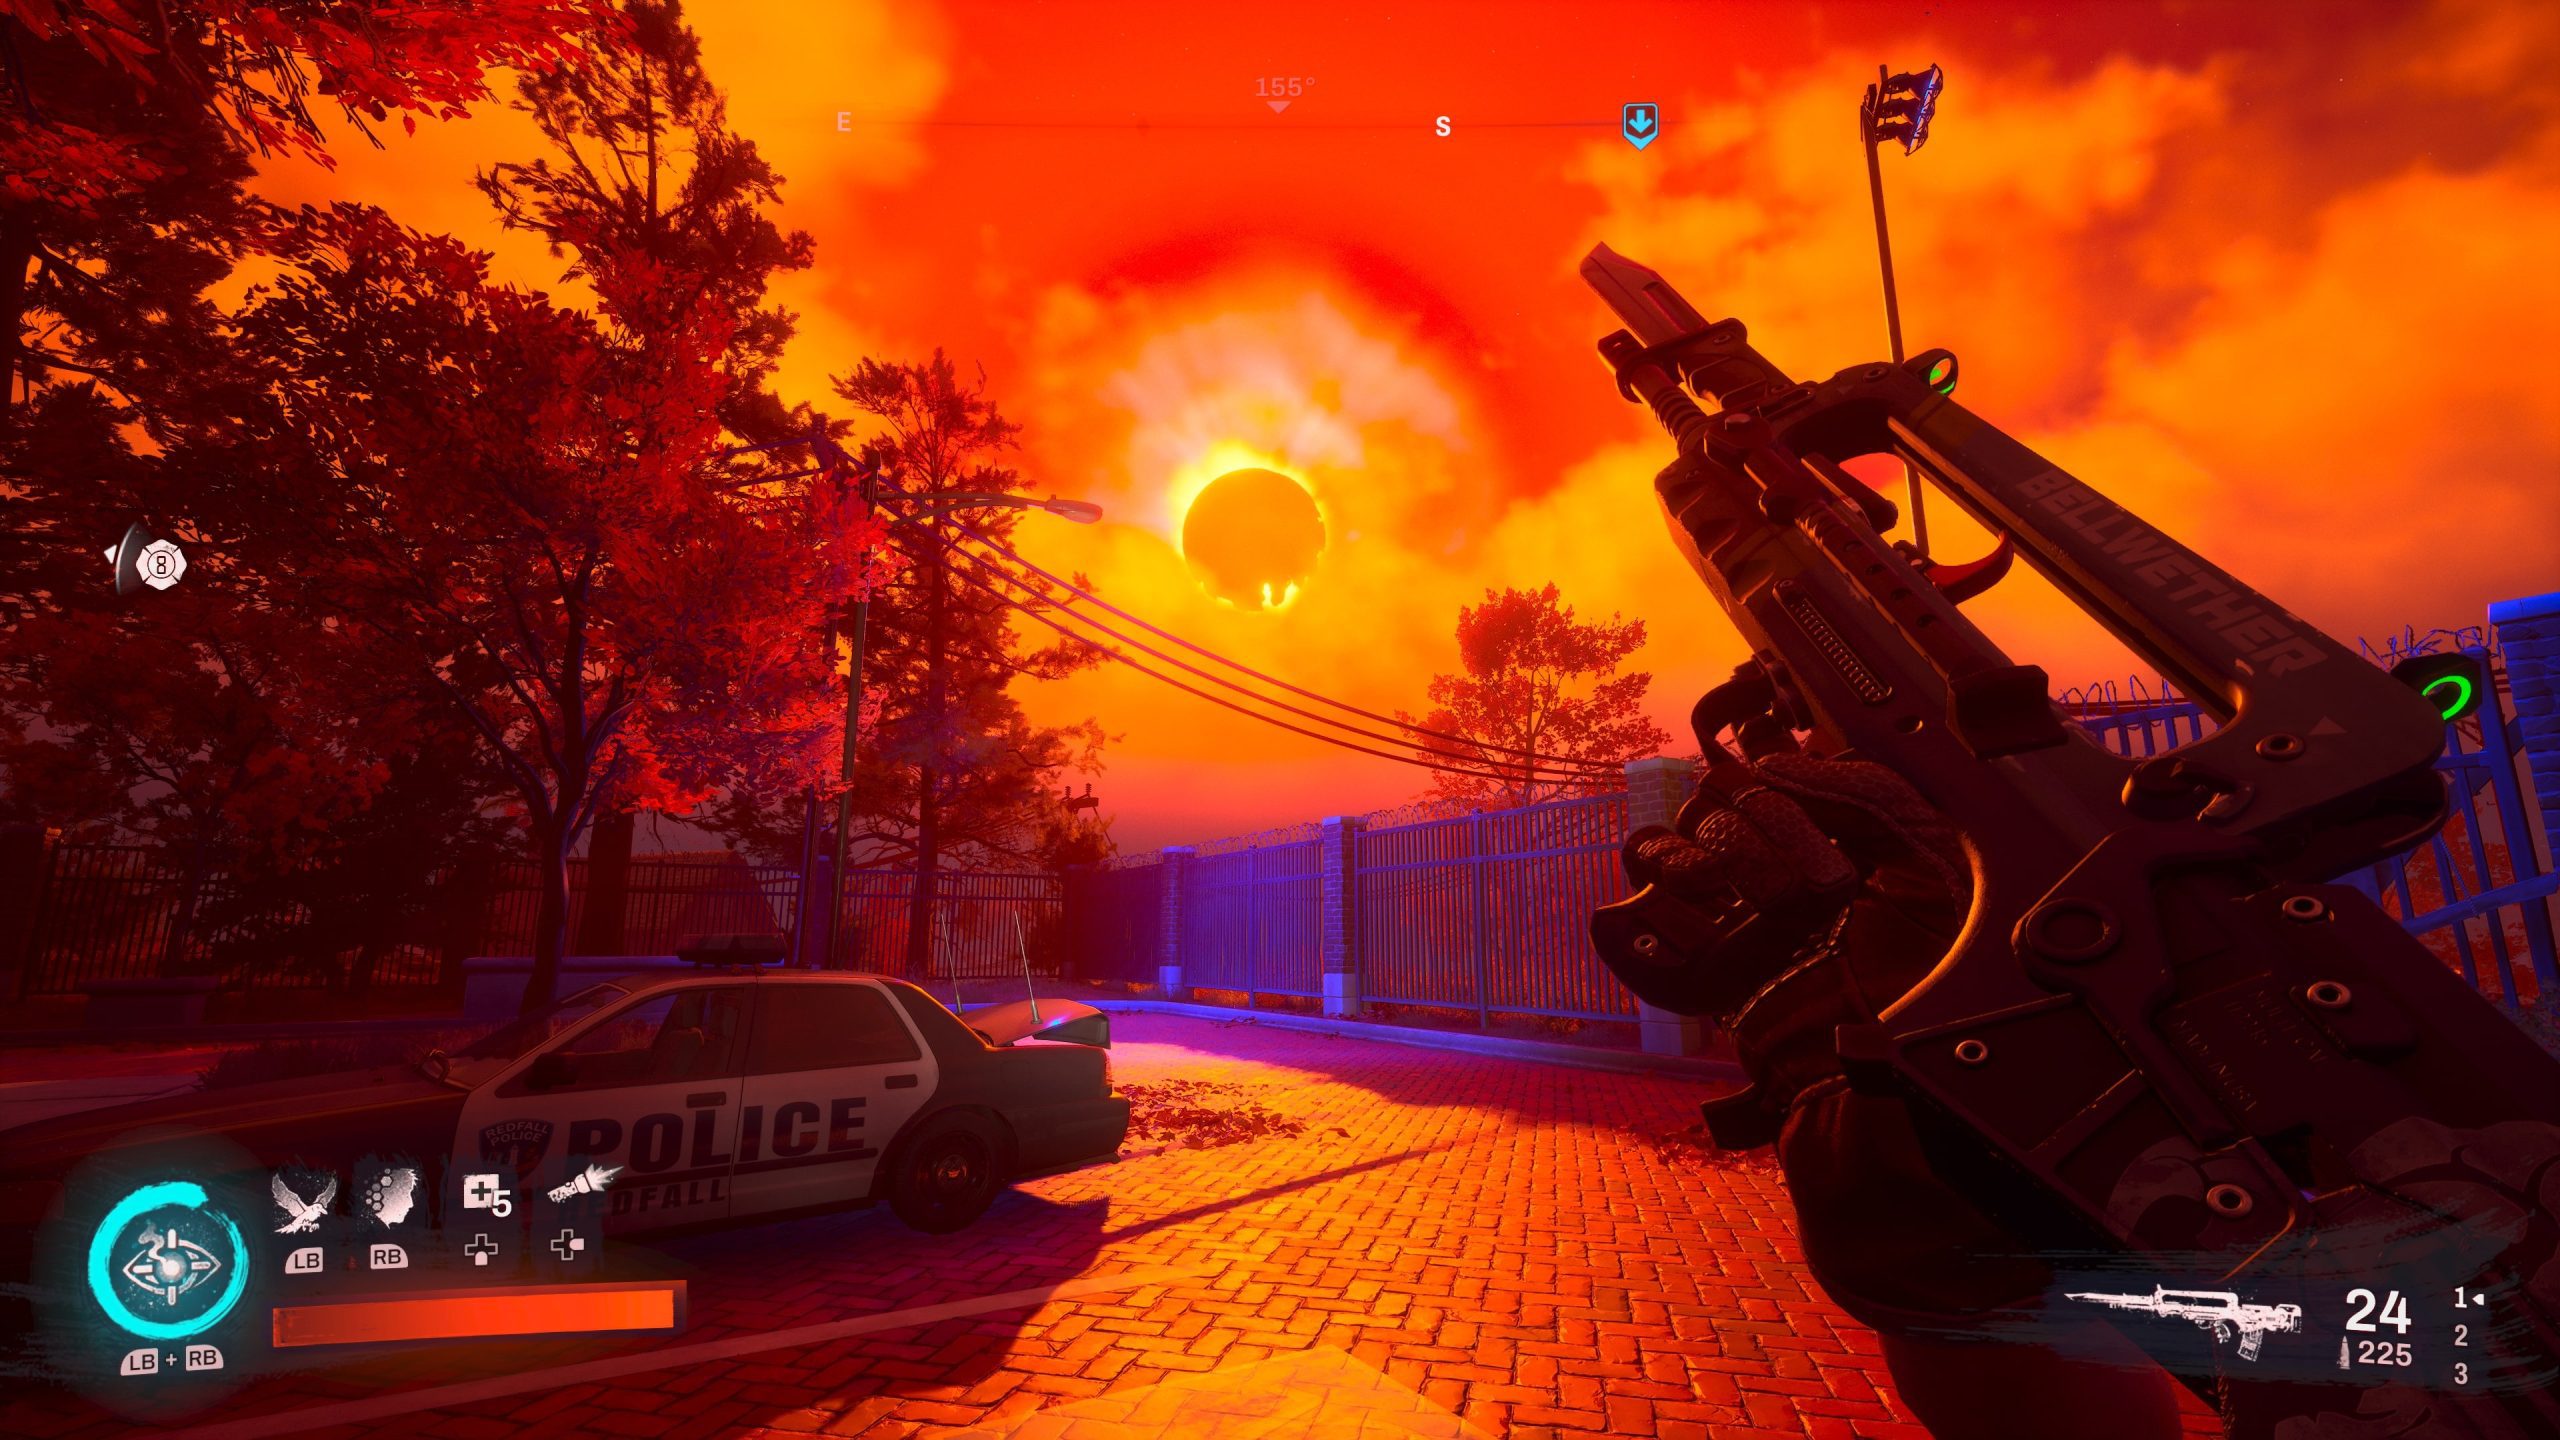 Redfall Update 2 Adds a 60FPS Mode, Five Months After Launch